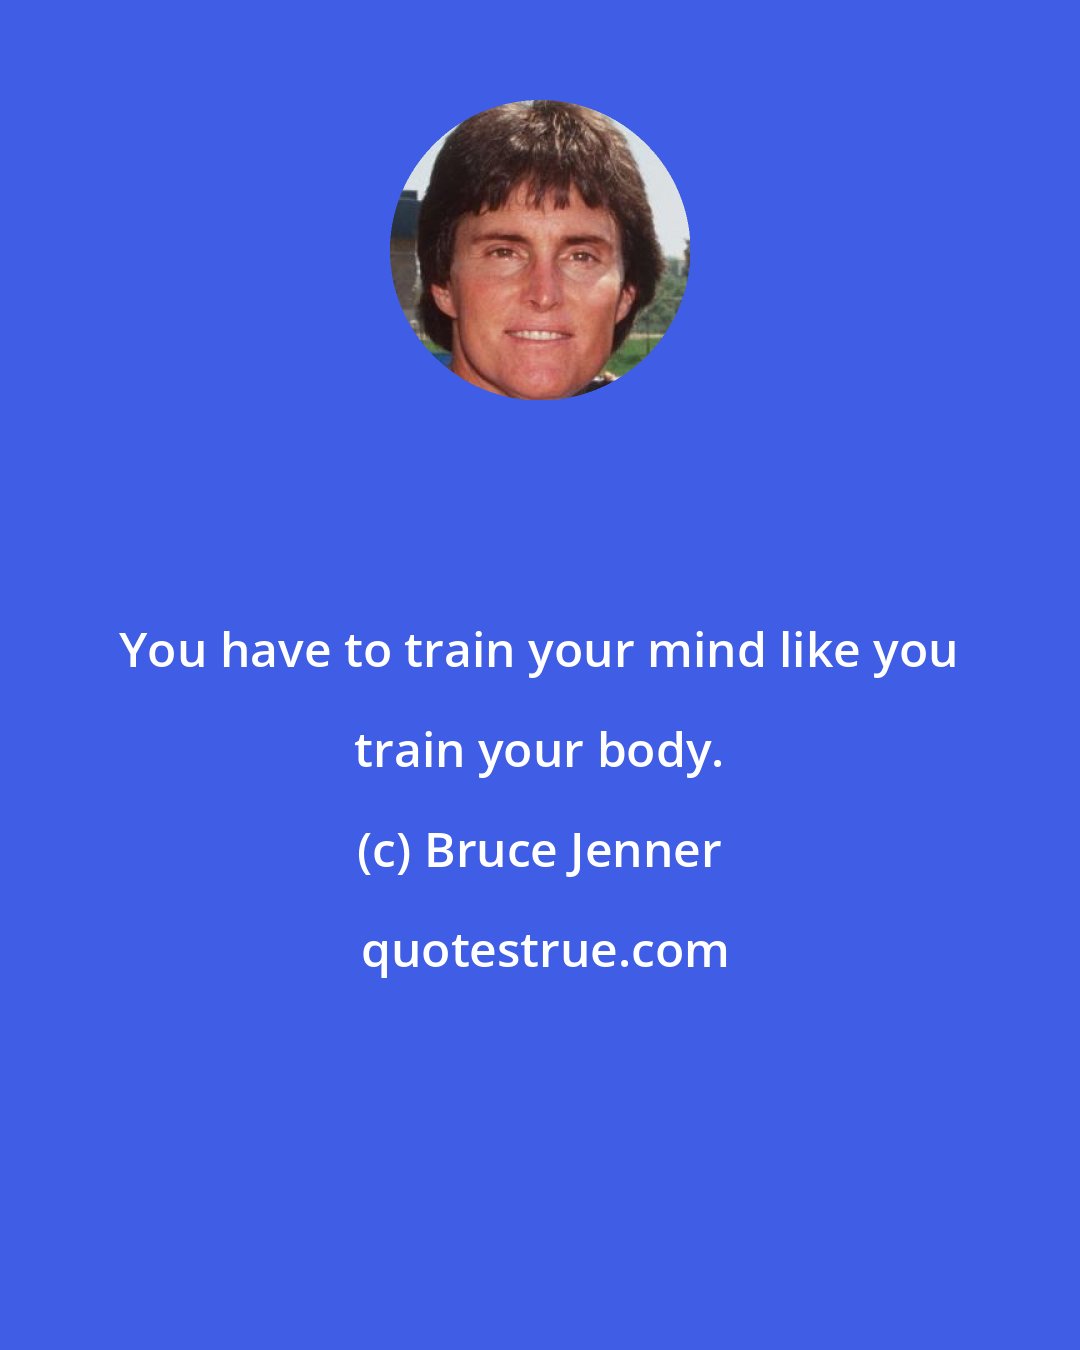 Bruce Jenner: You have to train your mind like you train your body.